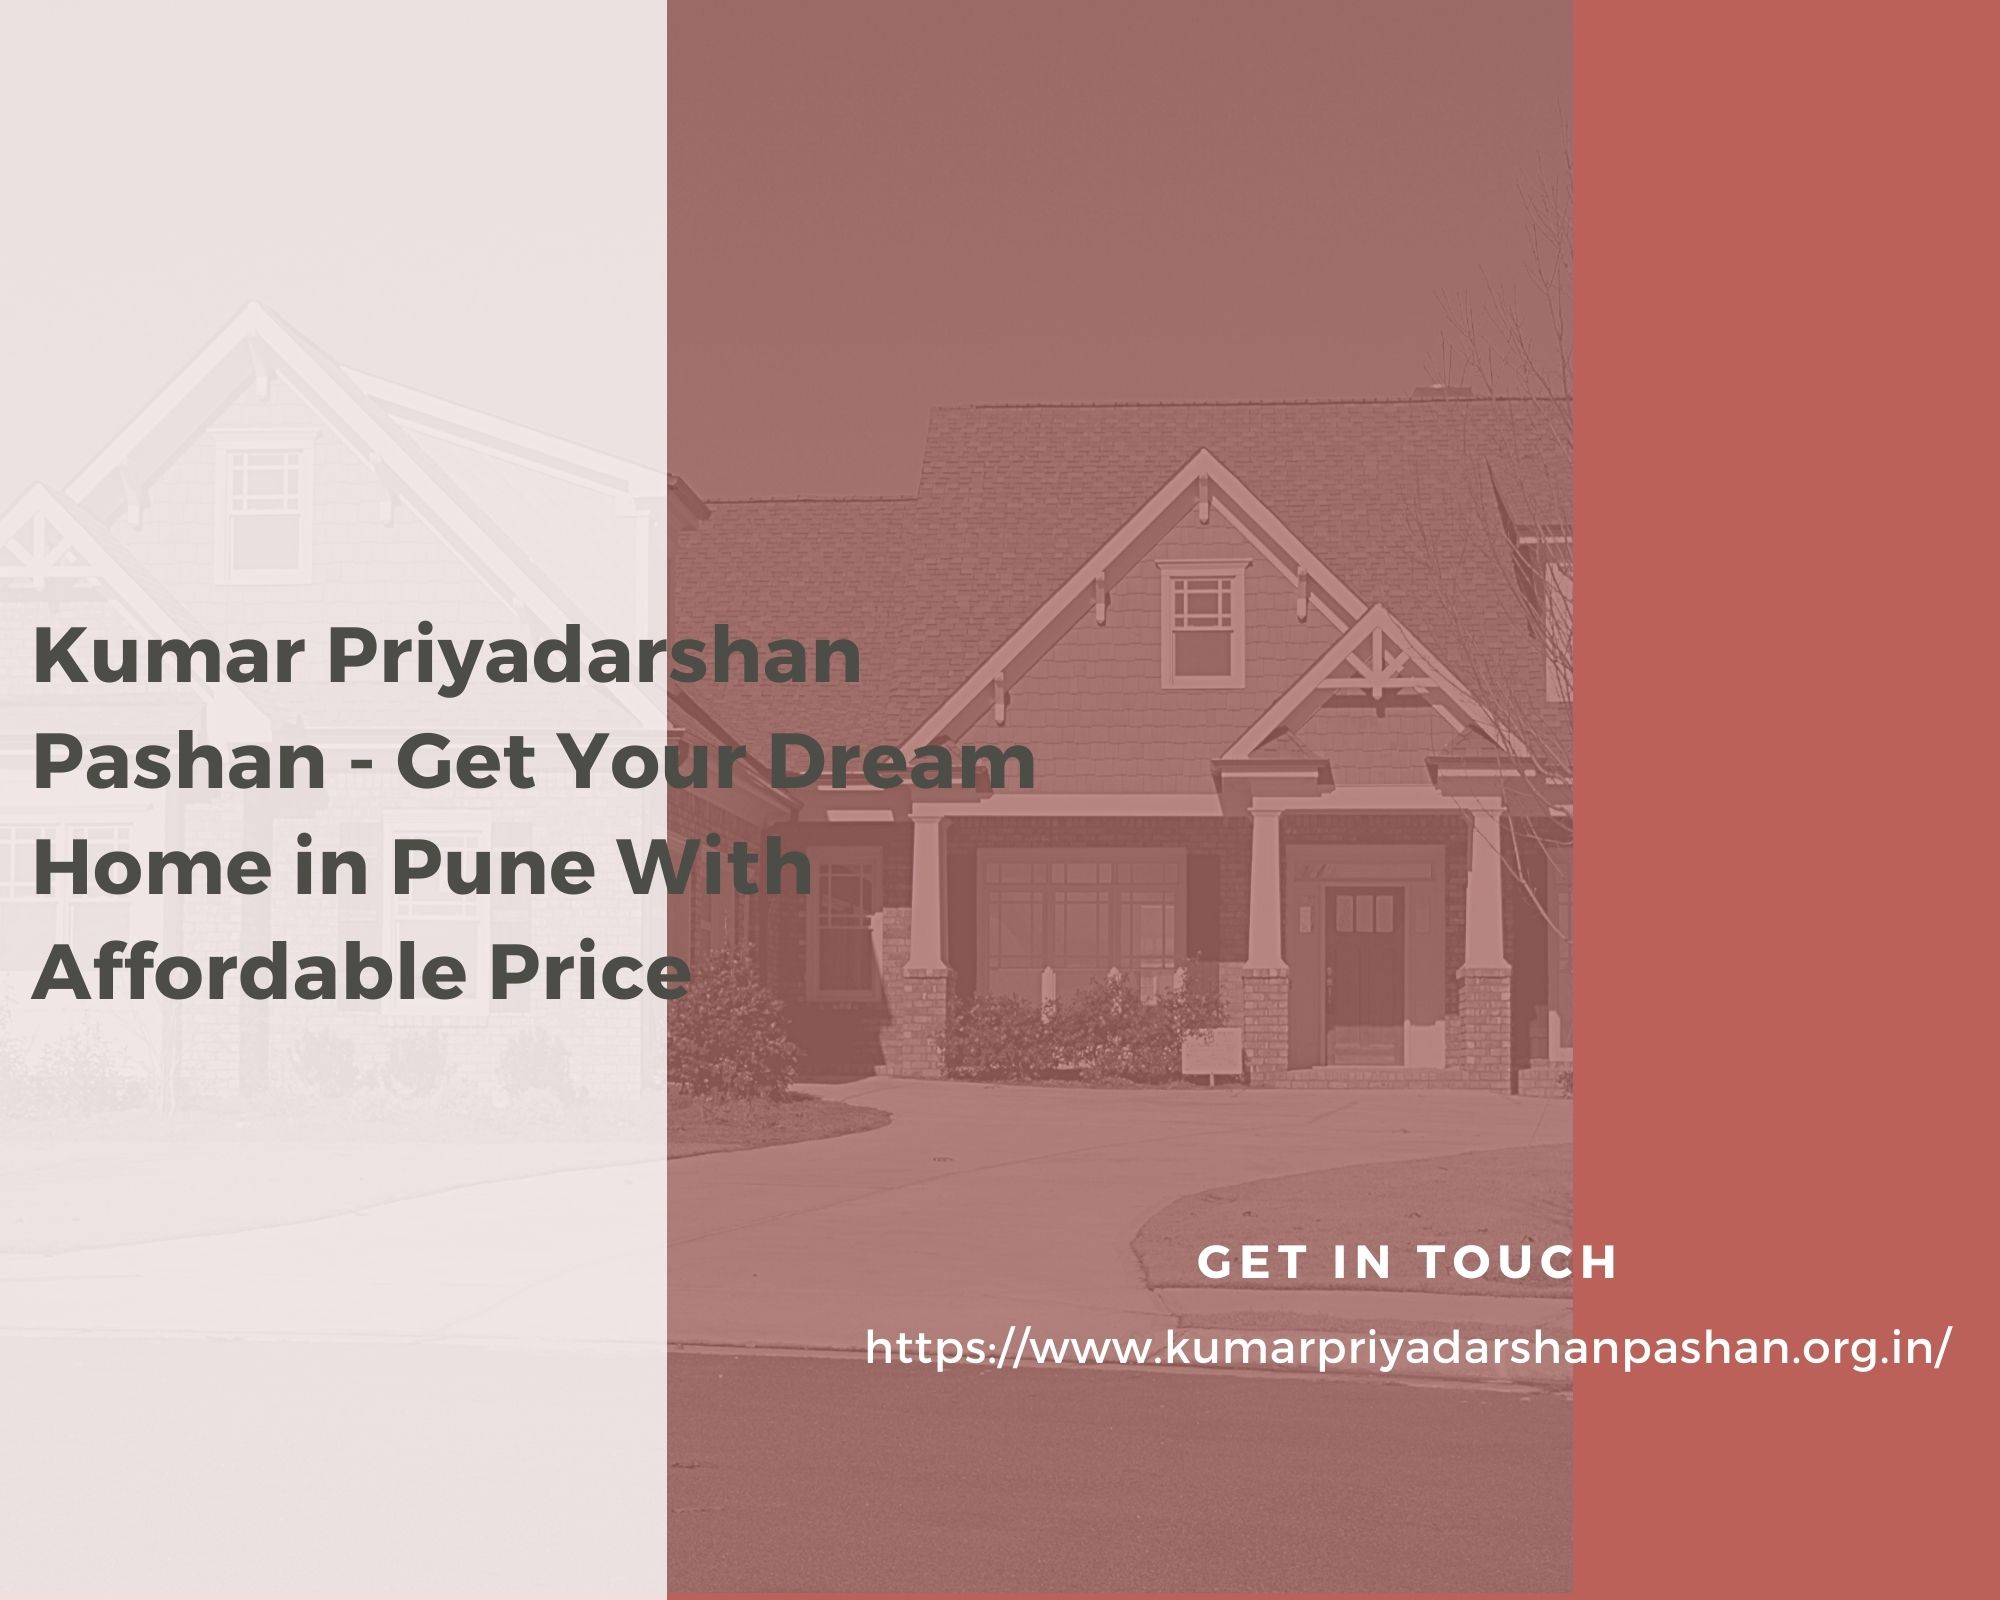 Kumar Priyadarshan Pashan - Get Your Dream Home in Pune With Affordable Price